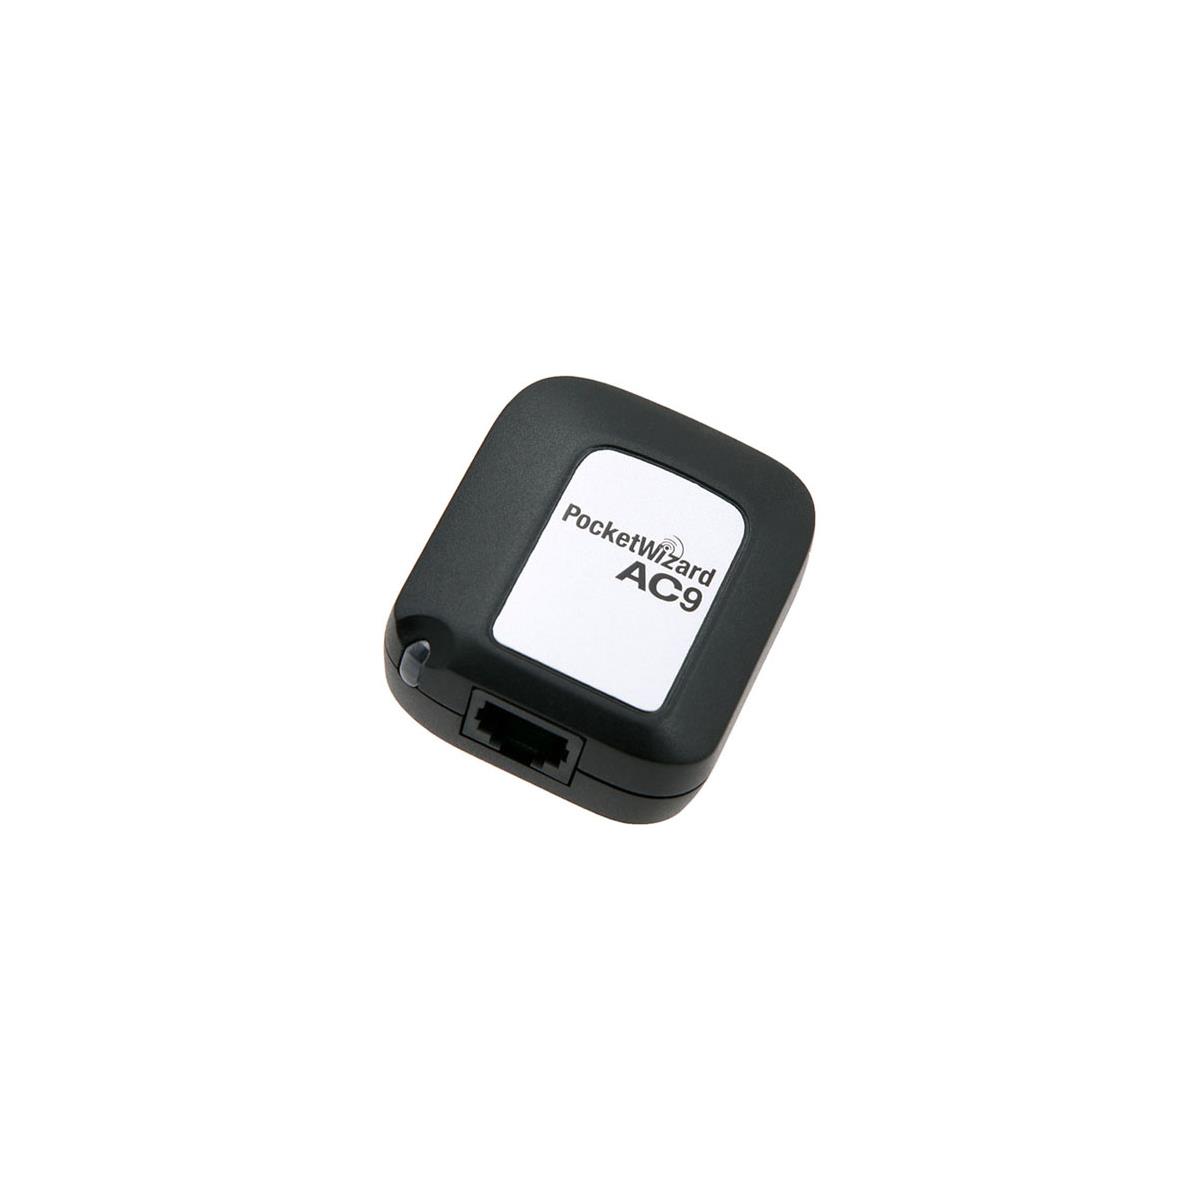 Image of PocketWizard AC9 AlienBees Adapter for Canon